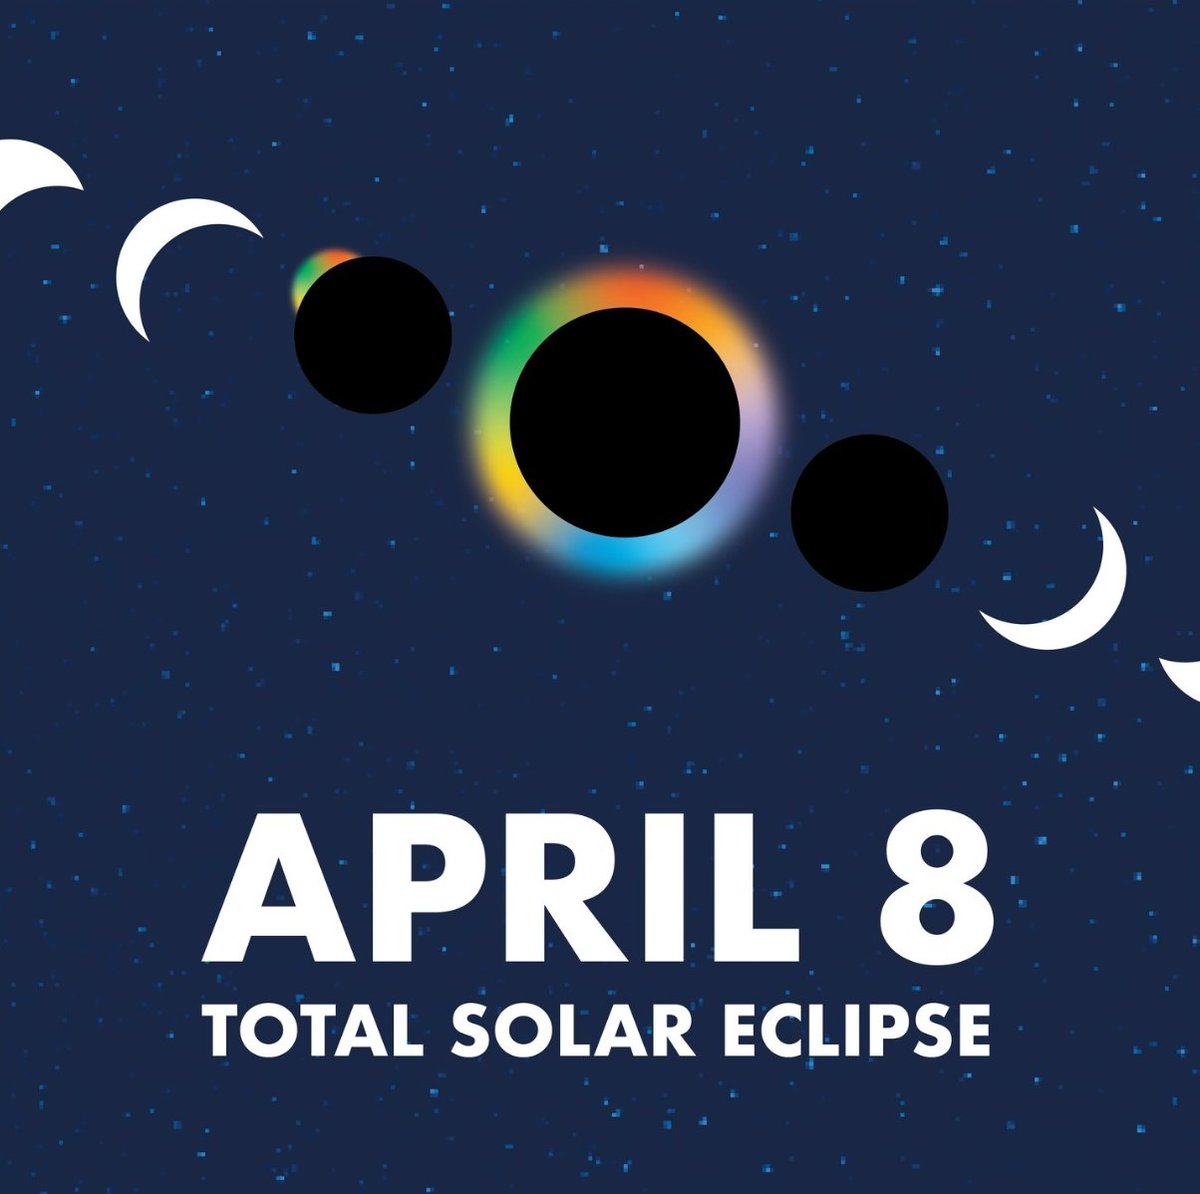 Mark your calendars and shades because we've got a celestial show coming your way! But remember, as much as we love a good cosmic spectacle, let's keep it responsible. Protect those eyes with proper eyewear and avoid staring directly into the sun like it owes you money.